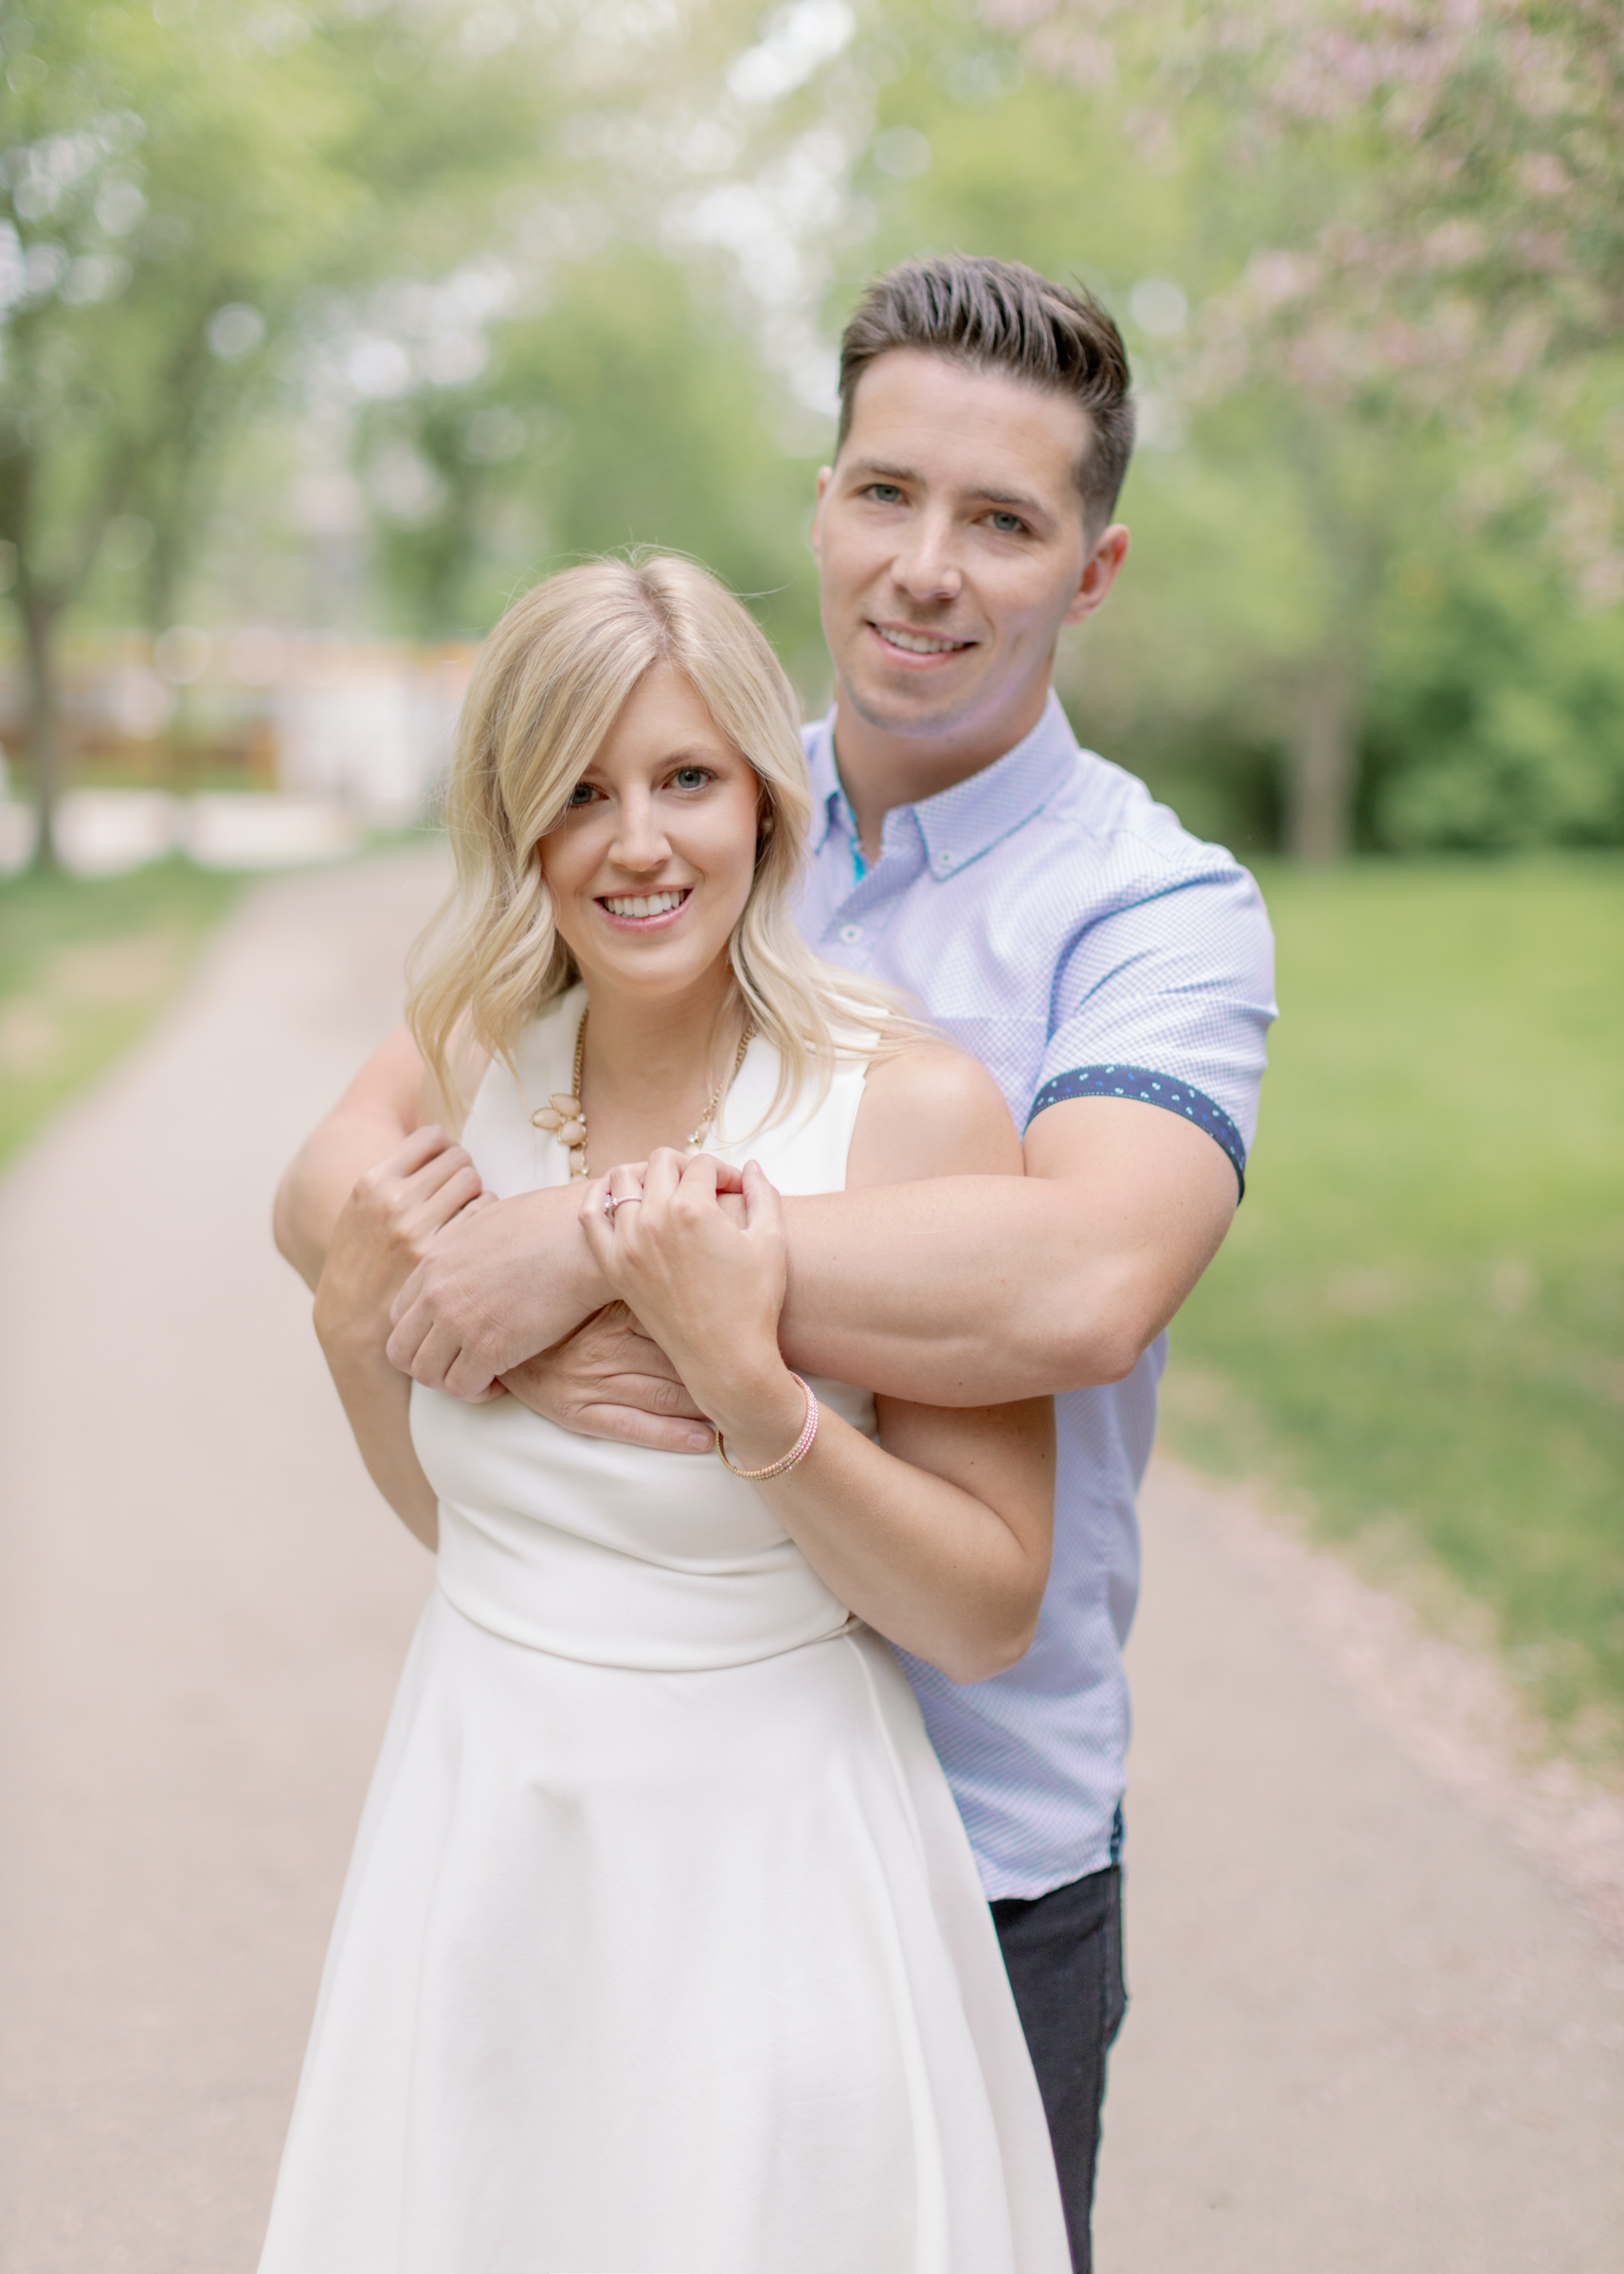 hug from behind during engagement session